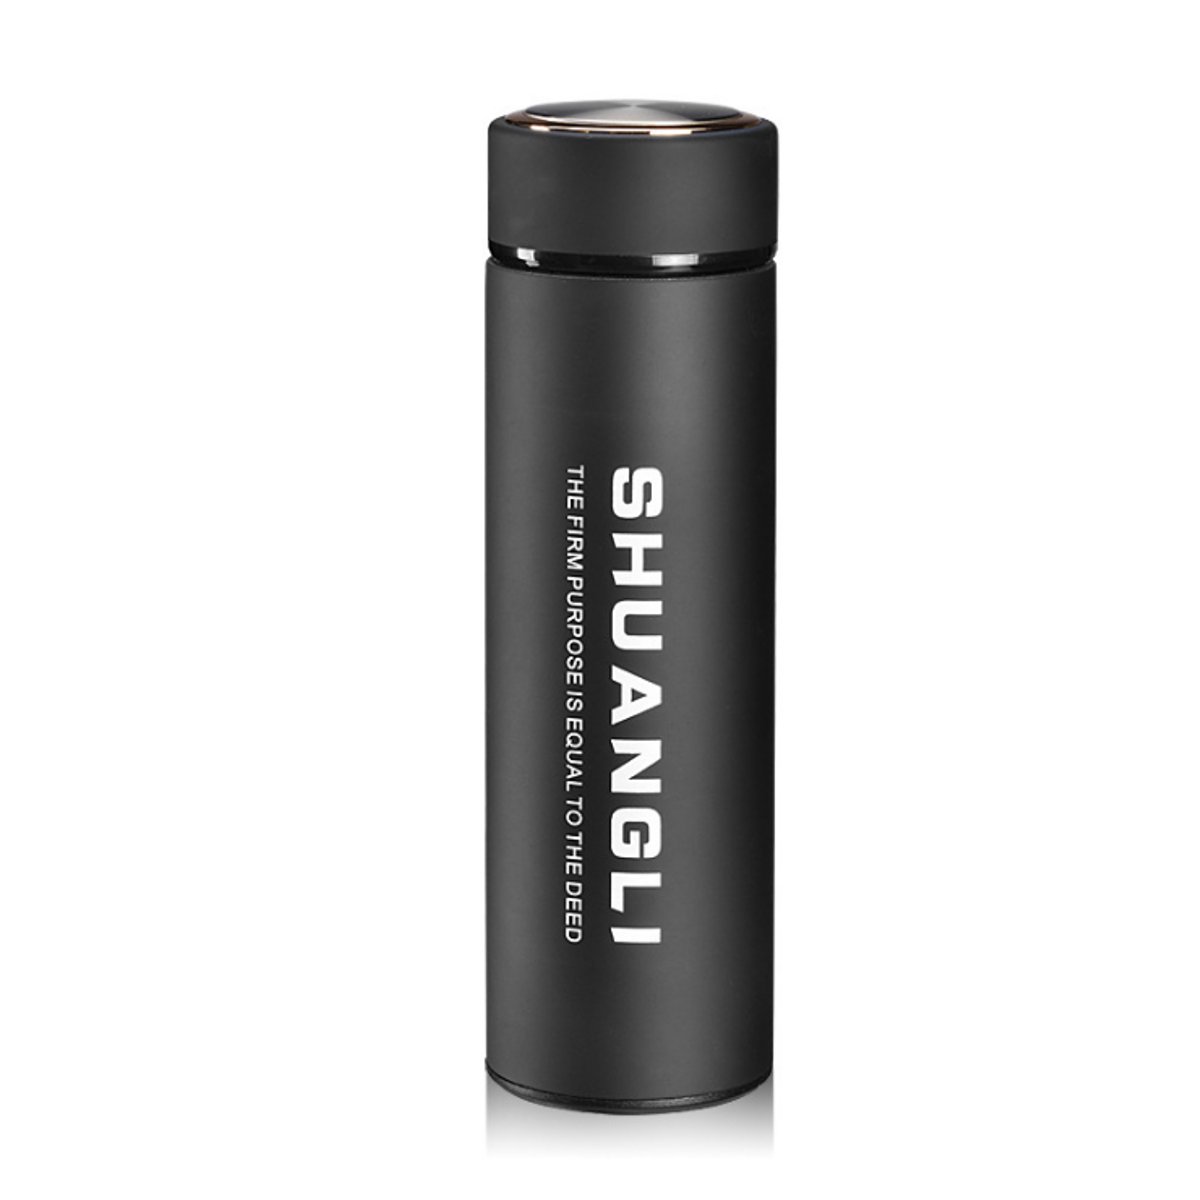 480ml-Stainless-Steel-Vacuum-Cup-Portable-Travel-Insulated-Bottle-Drinking-Mug-Water-Bottle-1400153